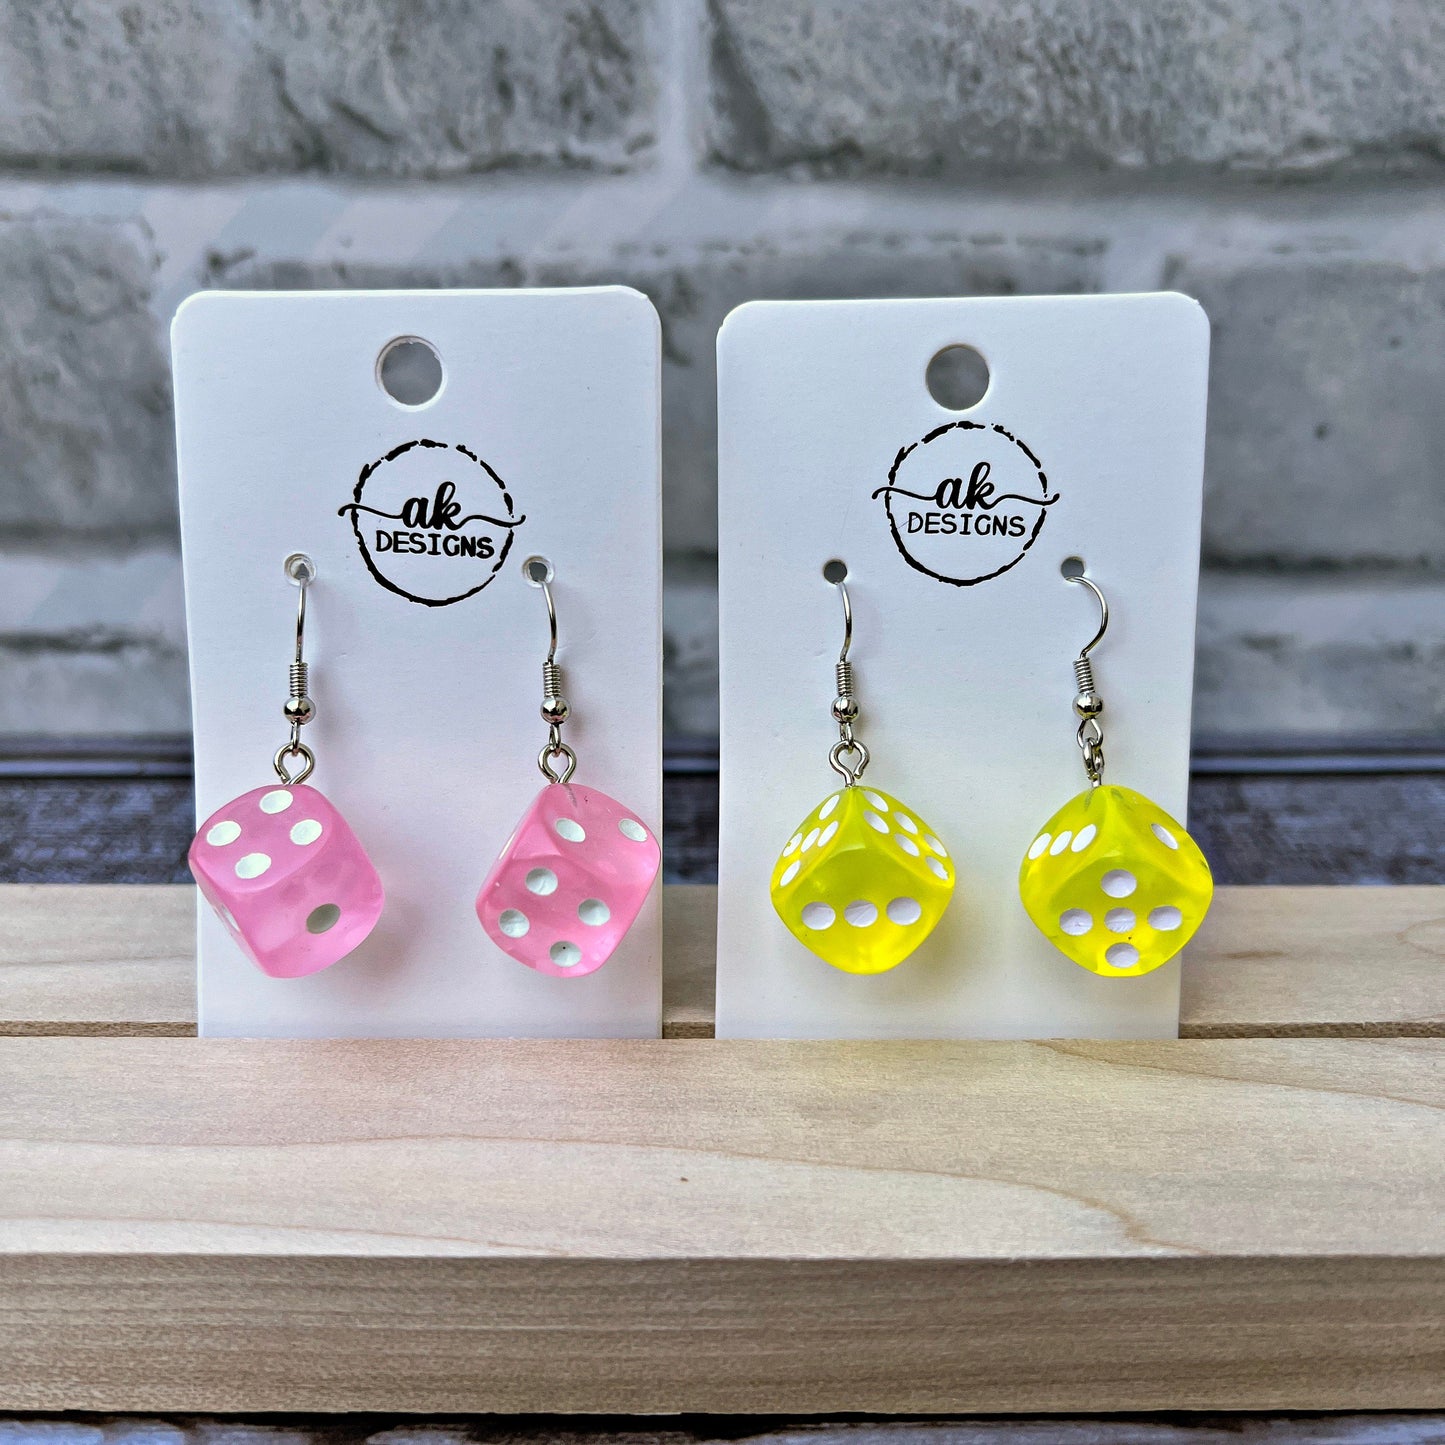 Dangle Six Sided Dice Earrings D6 Choose Color Lucky Craps Vegas, Hypoallergenic Gift Idea